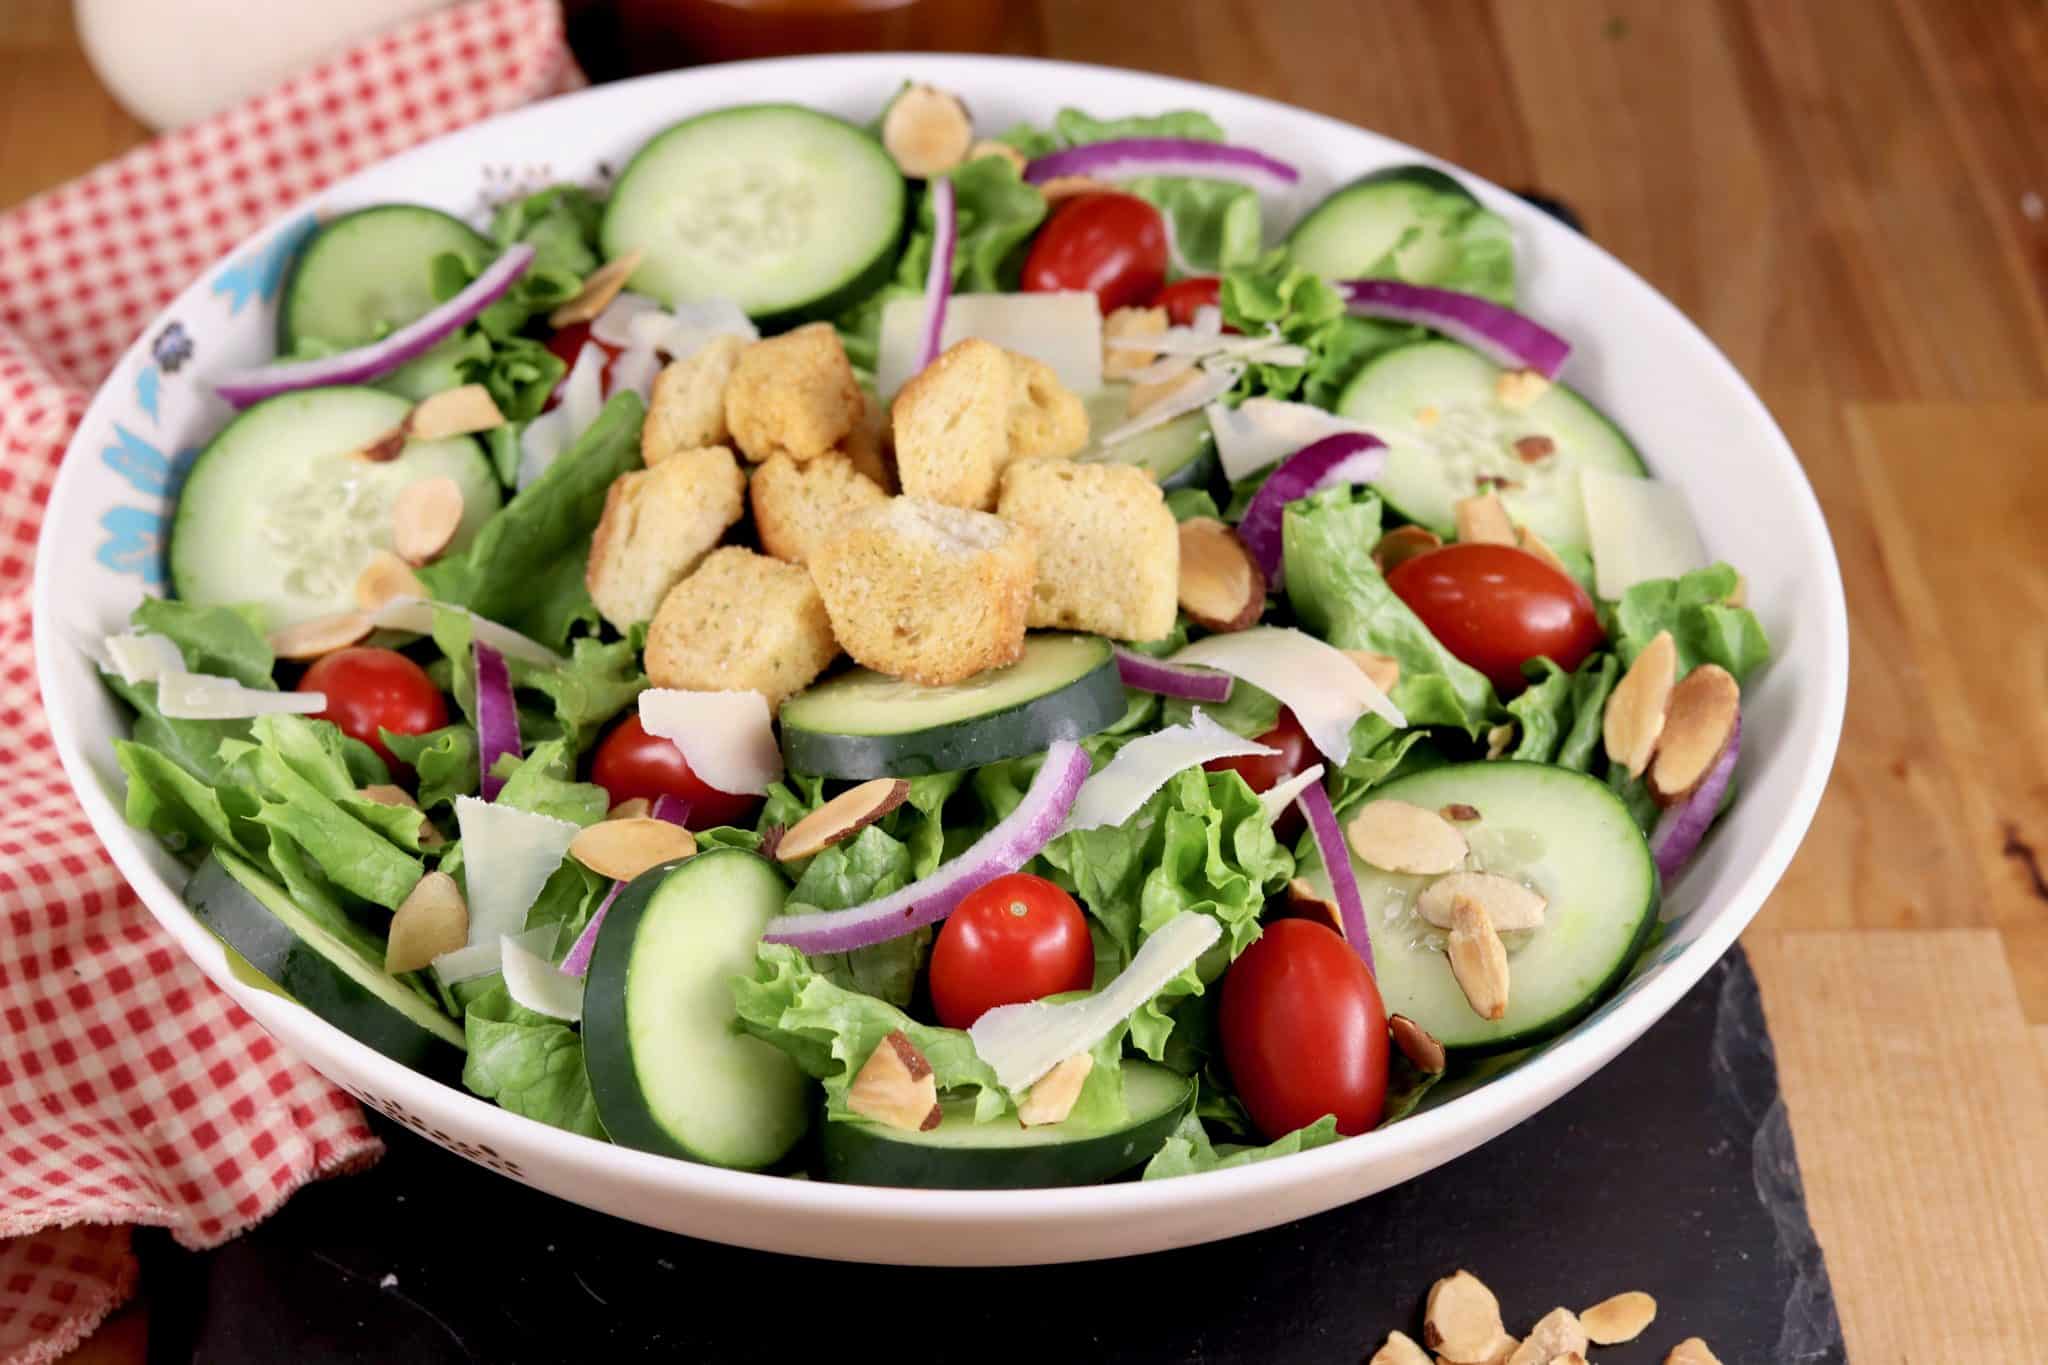 A bowl of salad with tomatoes, cucumbers and croutons.